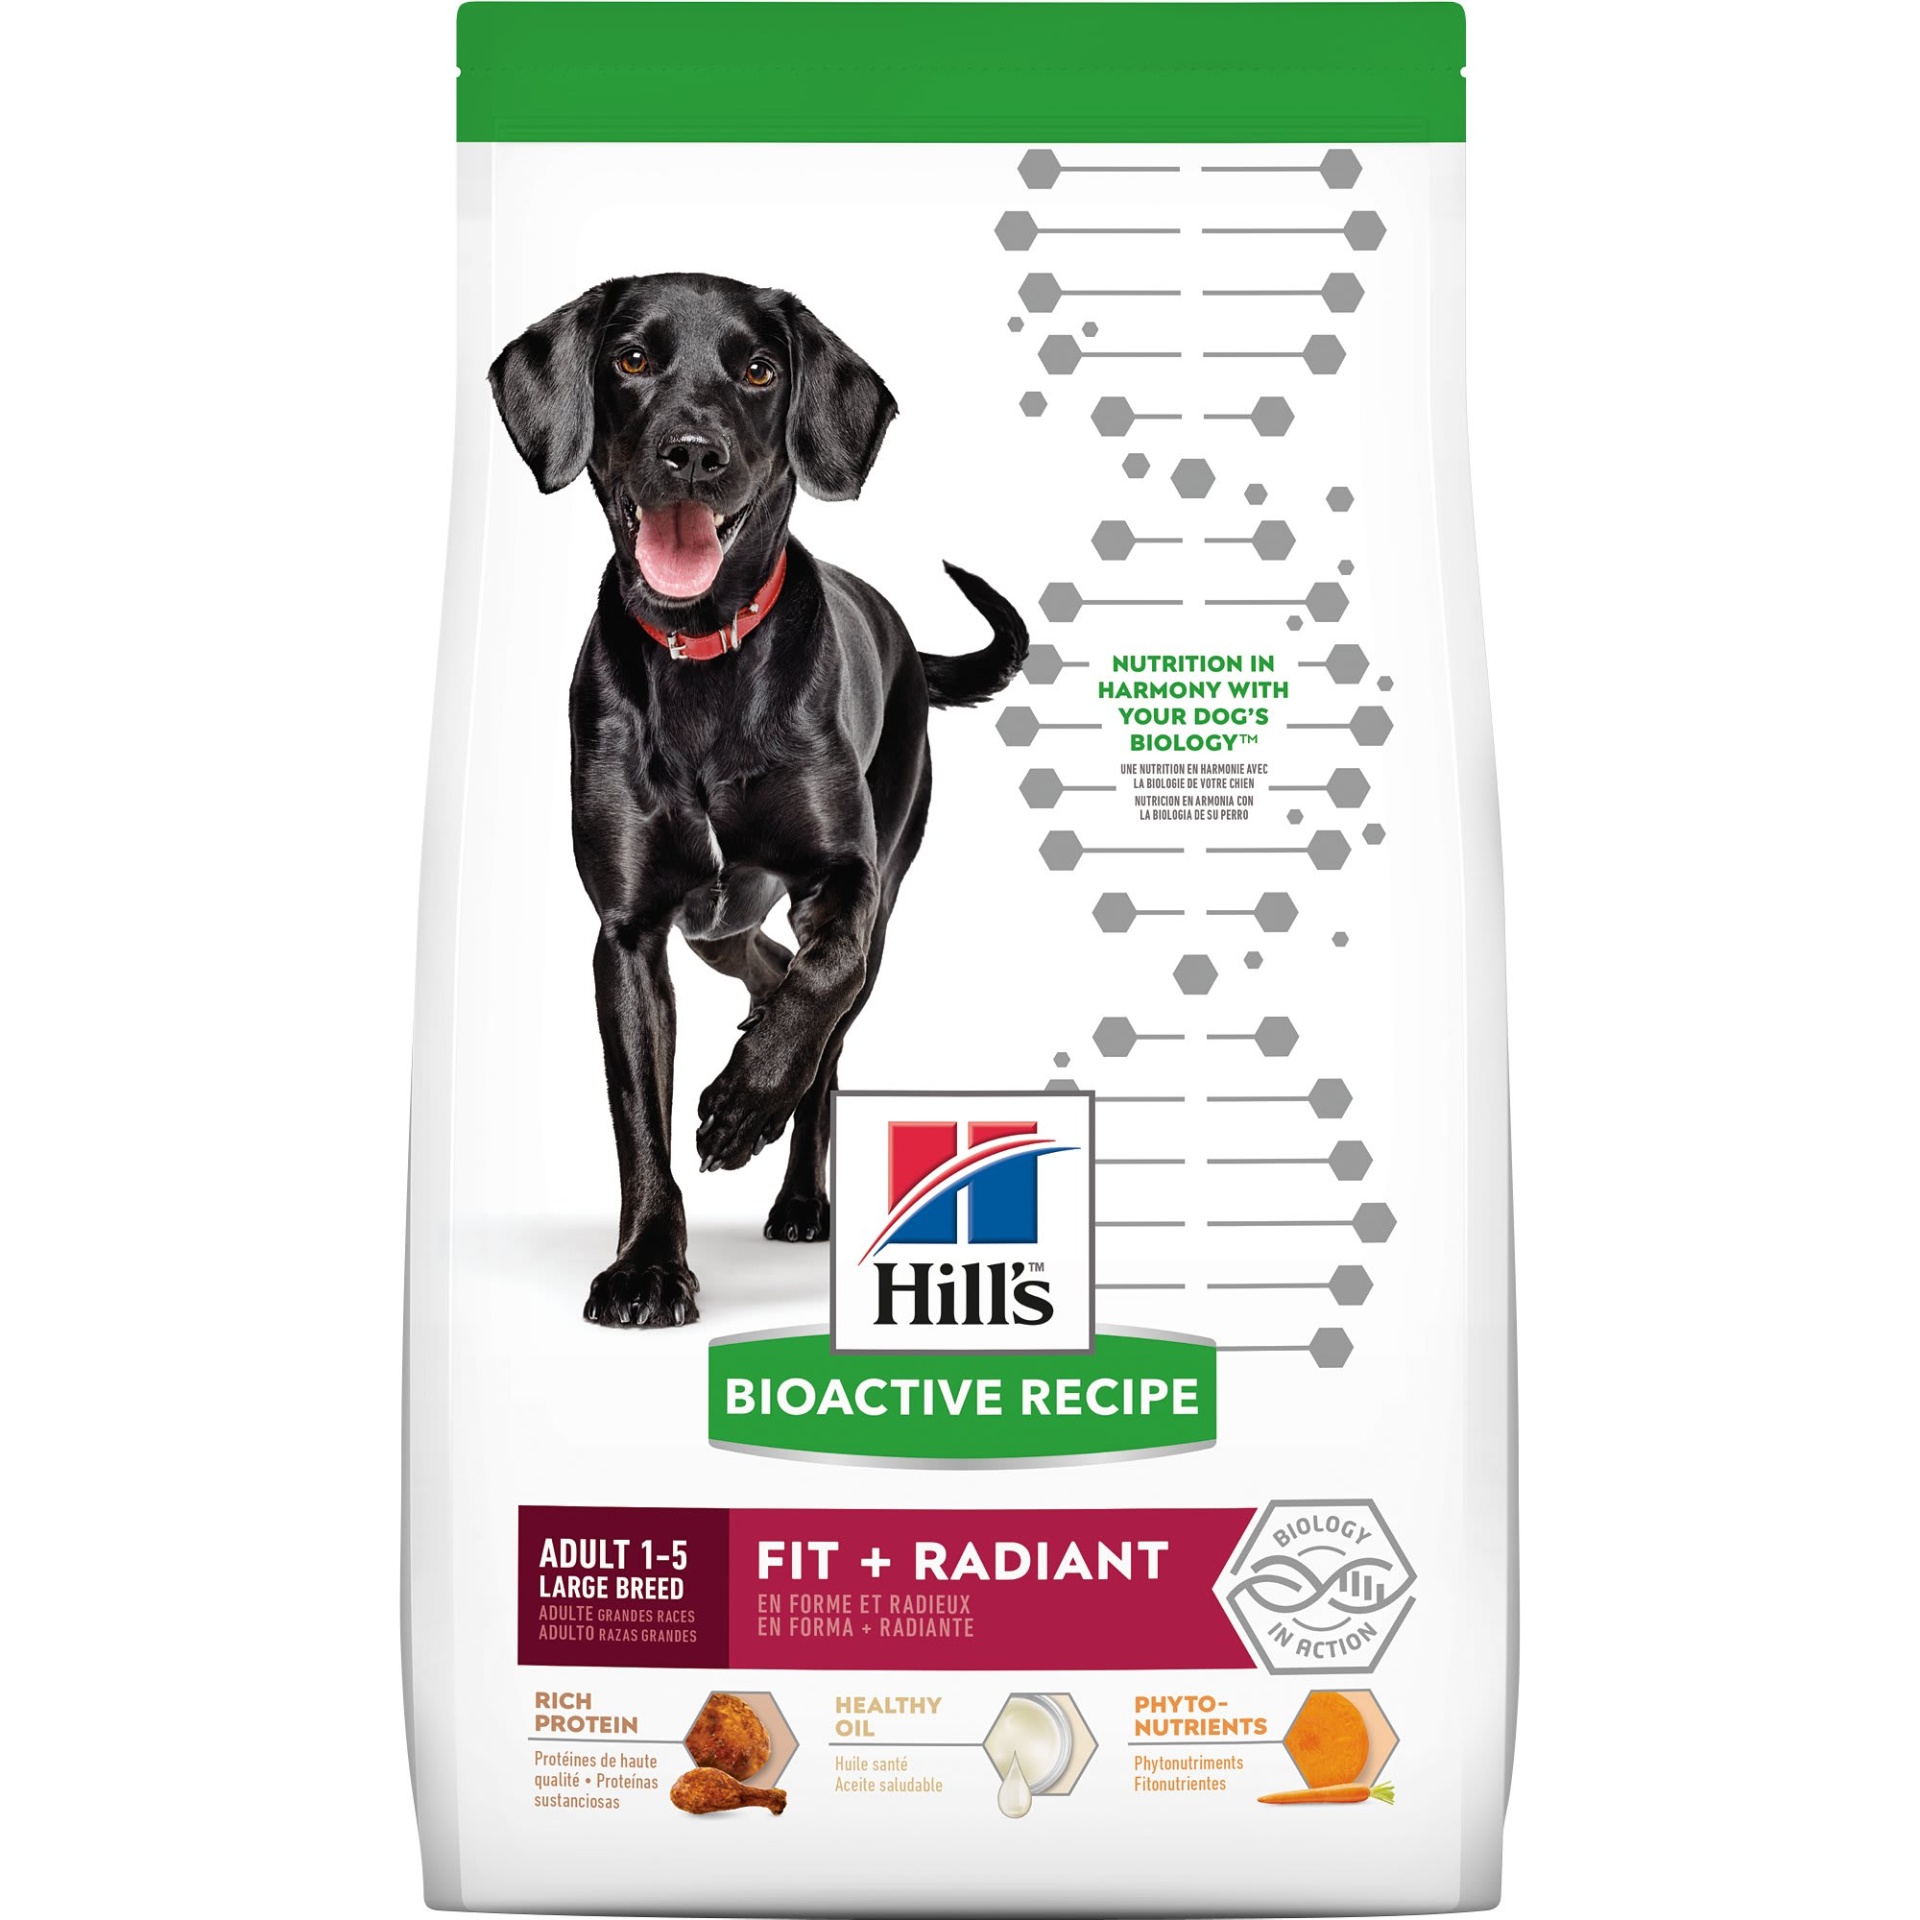 slide 1 of 1, Hill's Bioactive Recipe Fit + Radiant Chicken & Barley Adult Large Breed Dry Dog Food, 22.5 lb